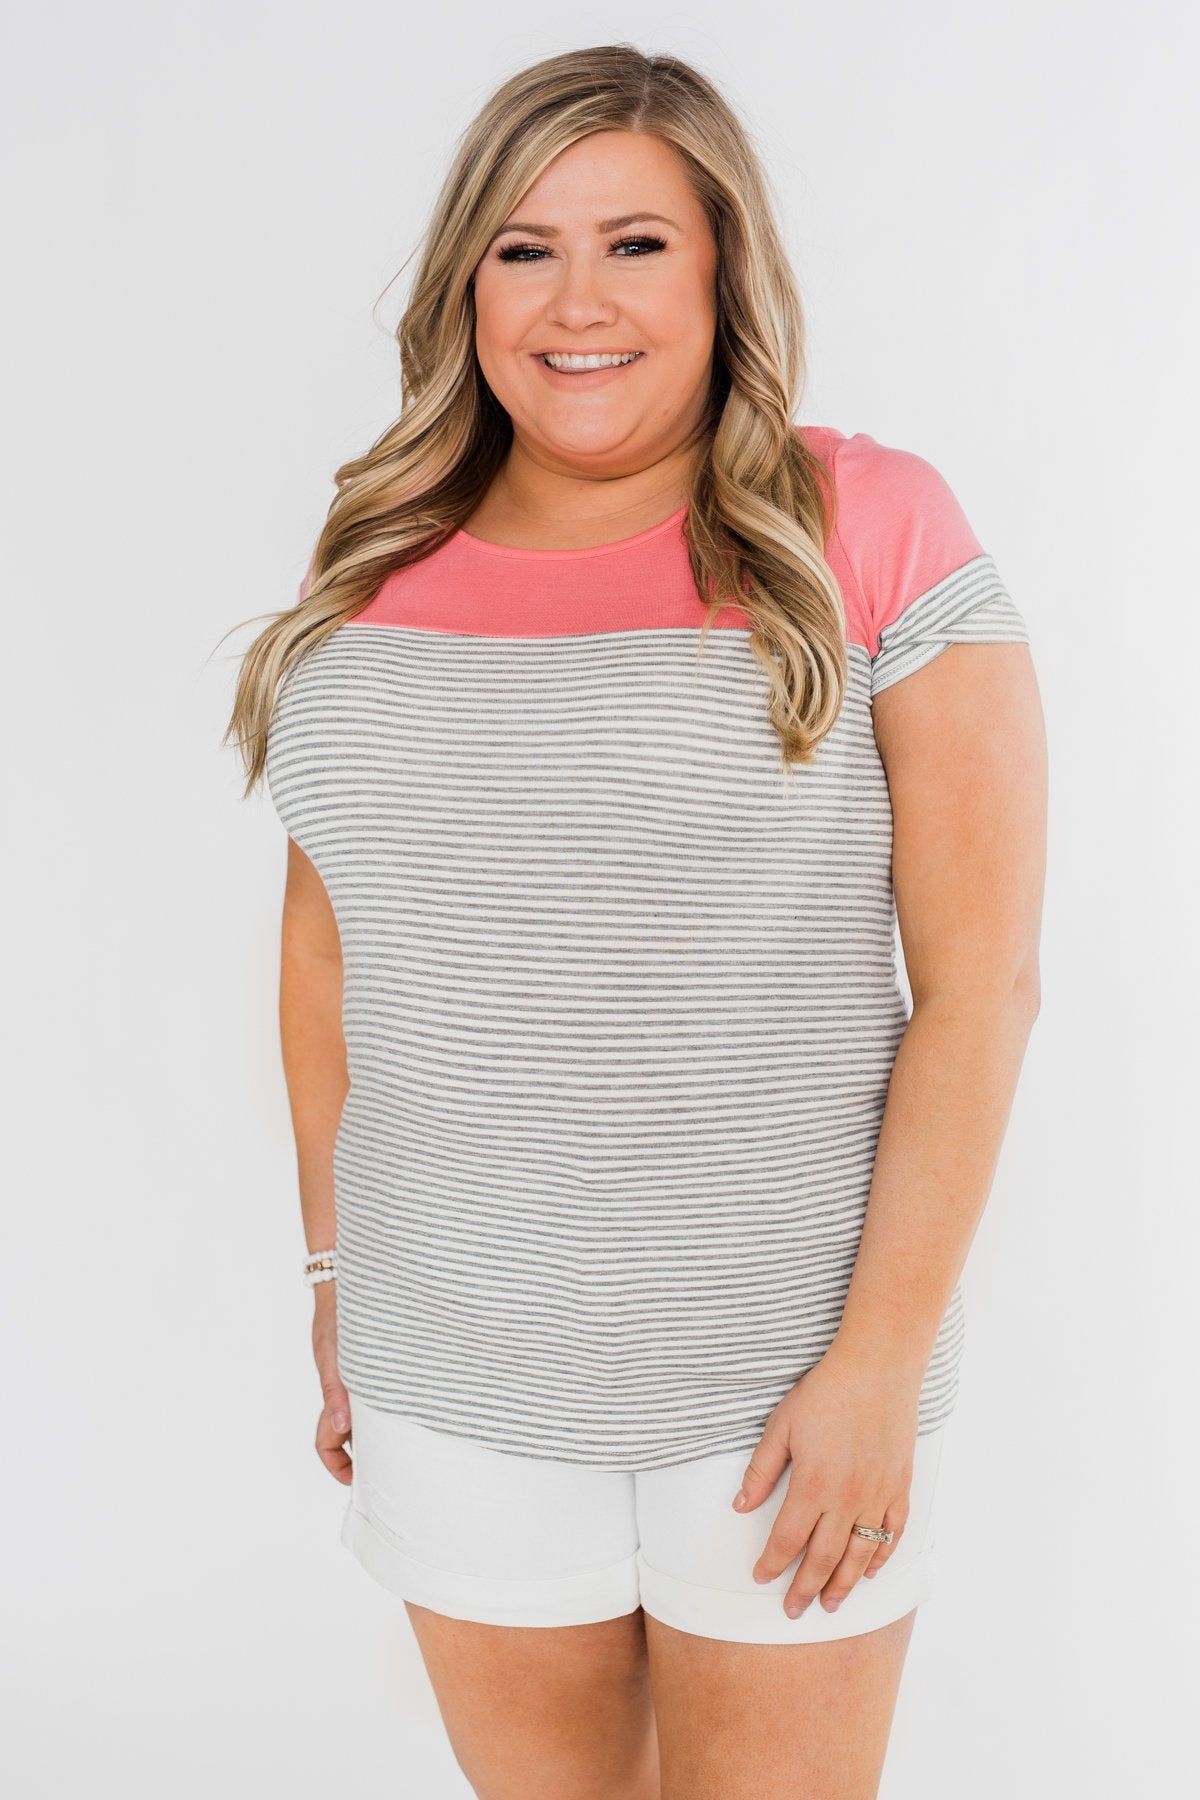 Spring Fever Short Sleeve Striped Top- Watermelon